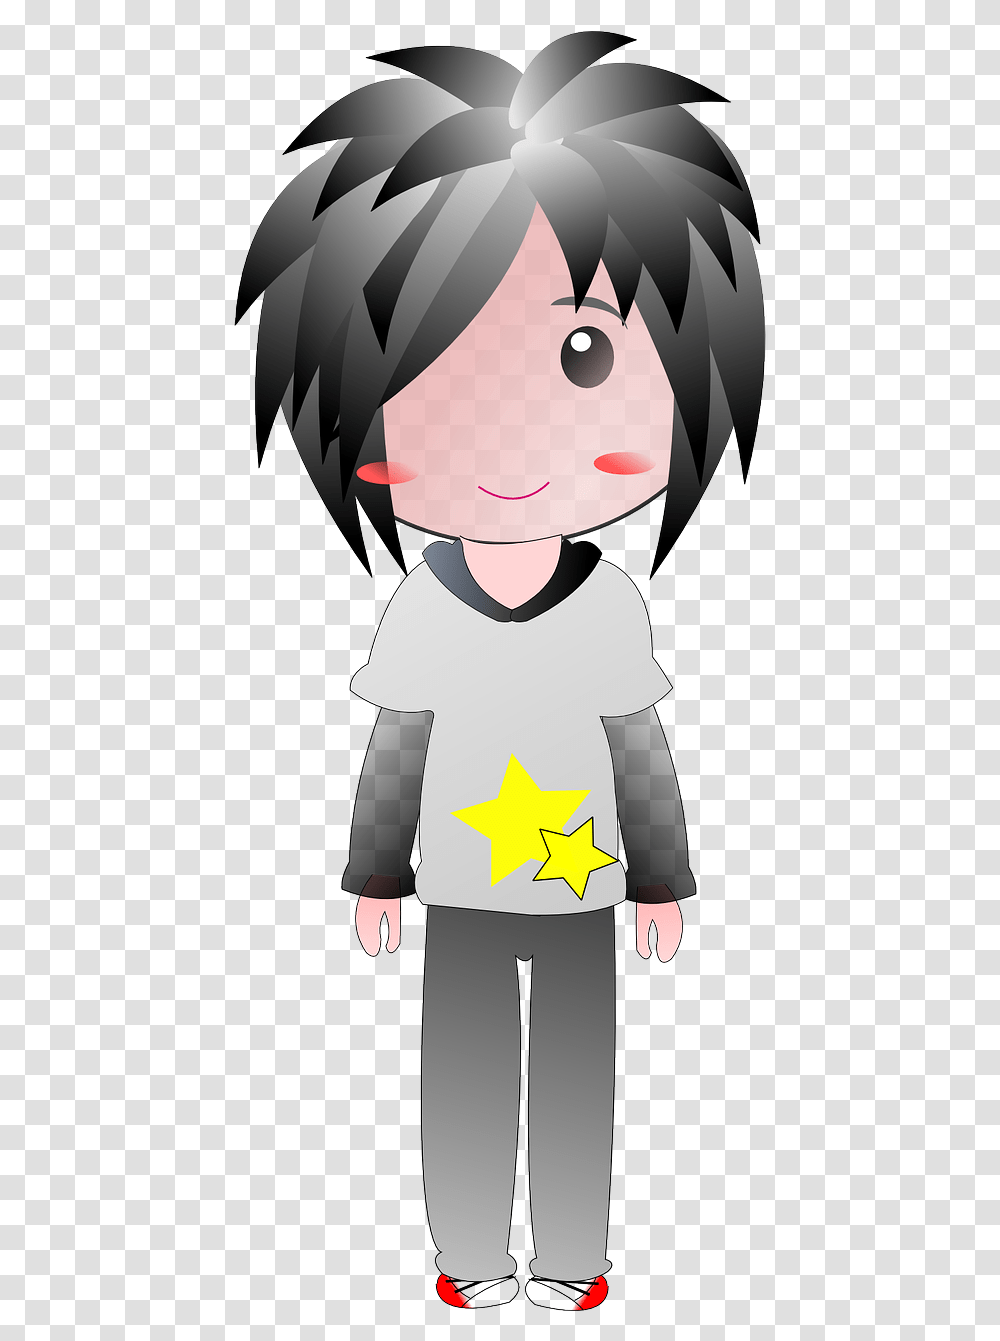 Guy Dude Boy Standing Anime Image Adolescente Anime, Symbol, Person, Human, Star Symbol Transparent Png